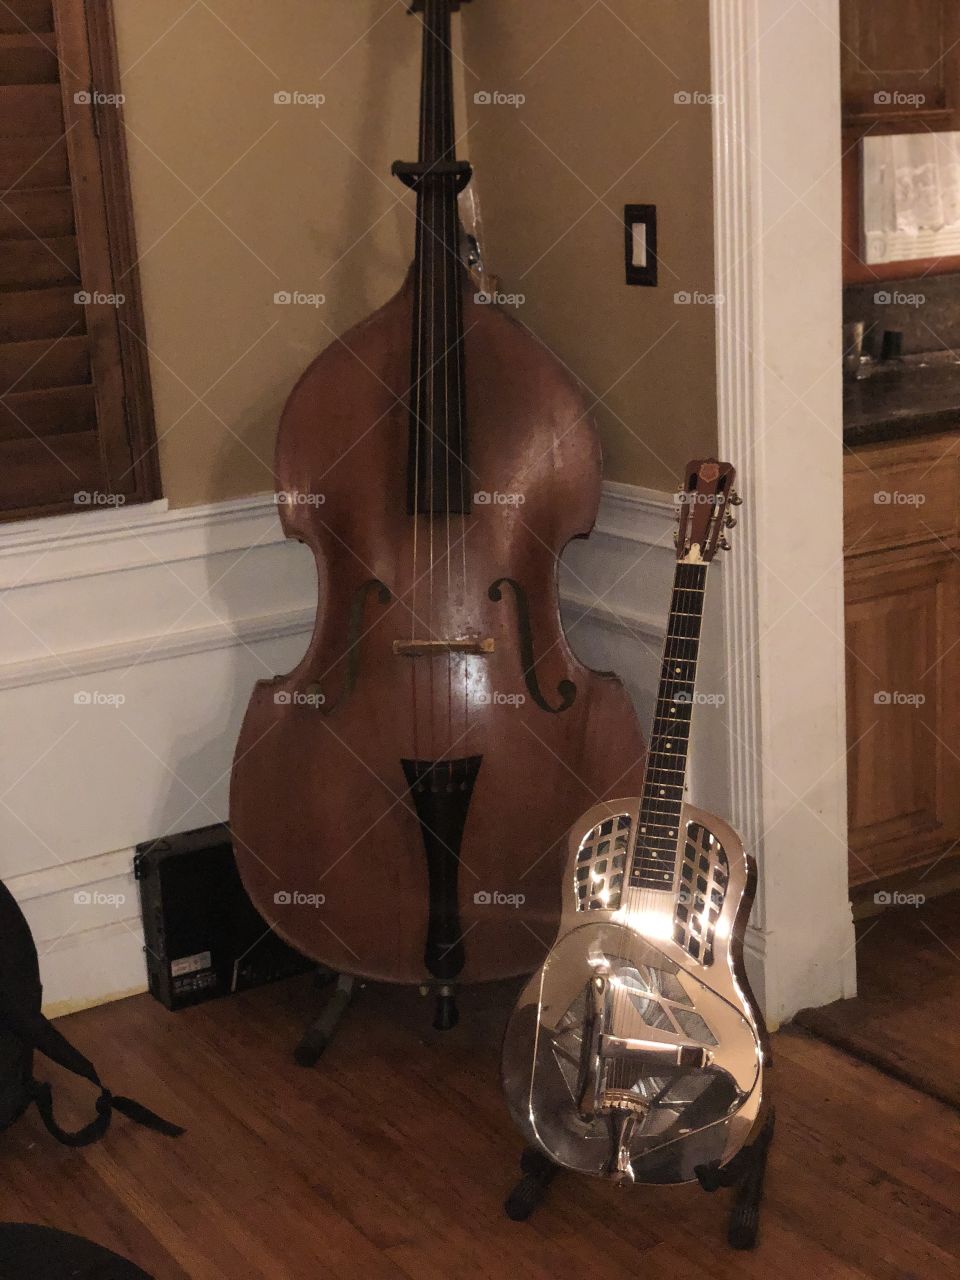 An upright double bass and tricone national guitar